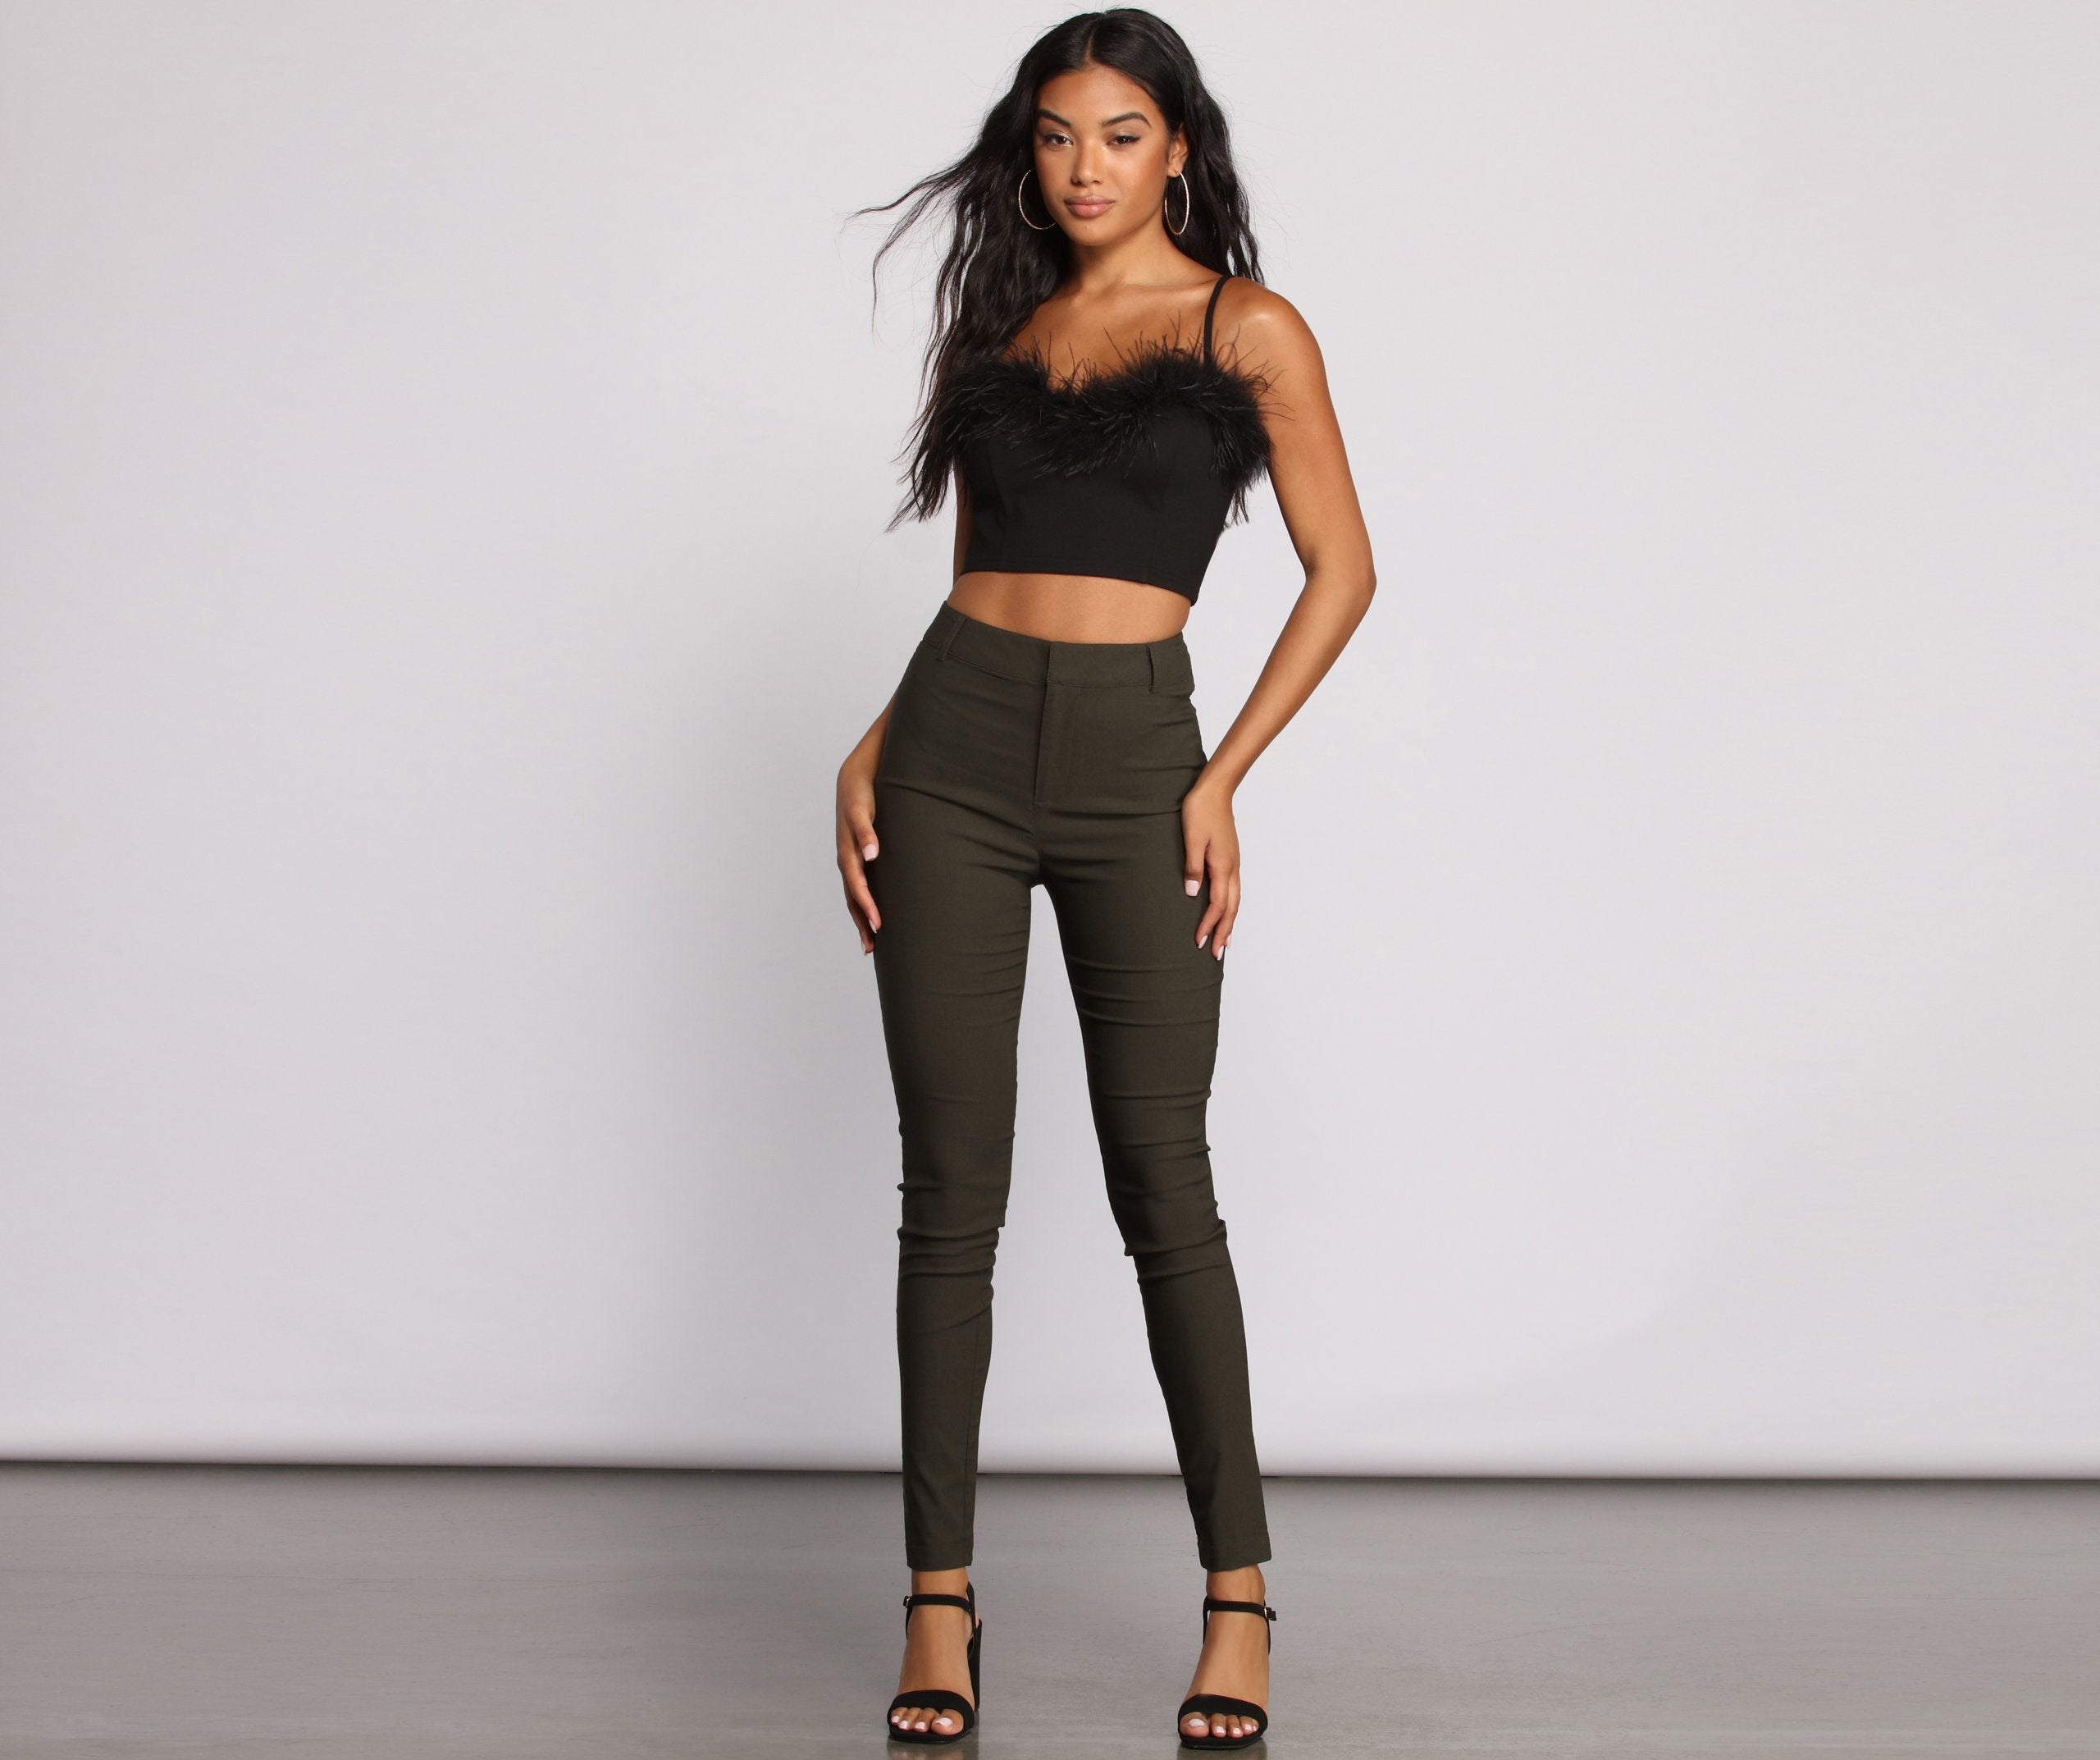 High Waist Basic Skinny Trouser Pants - Lady Occasions